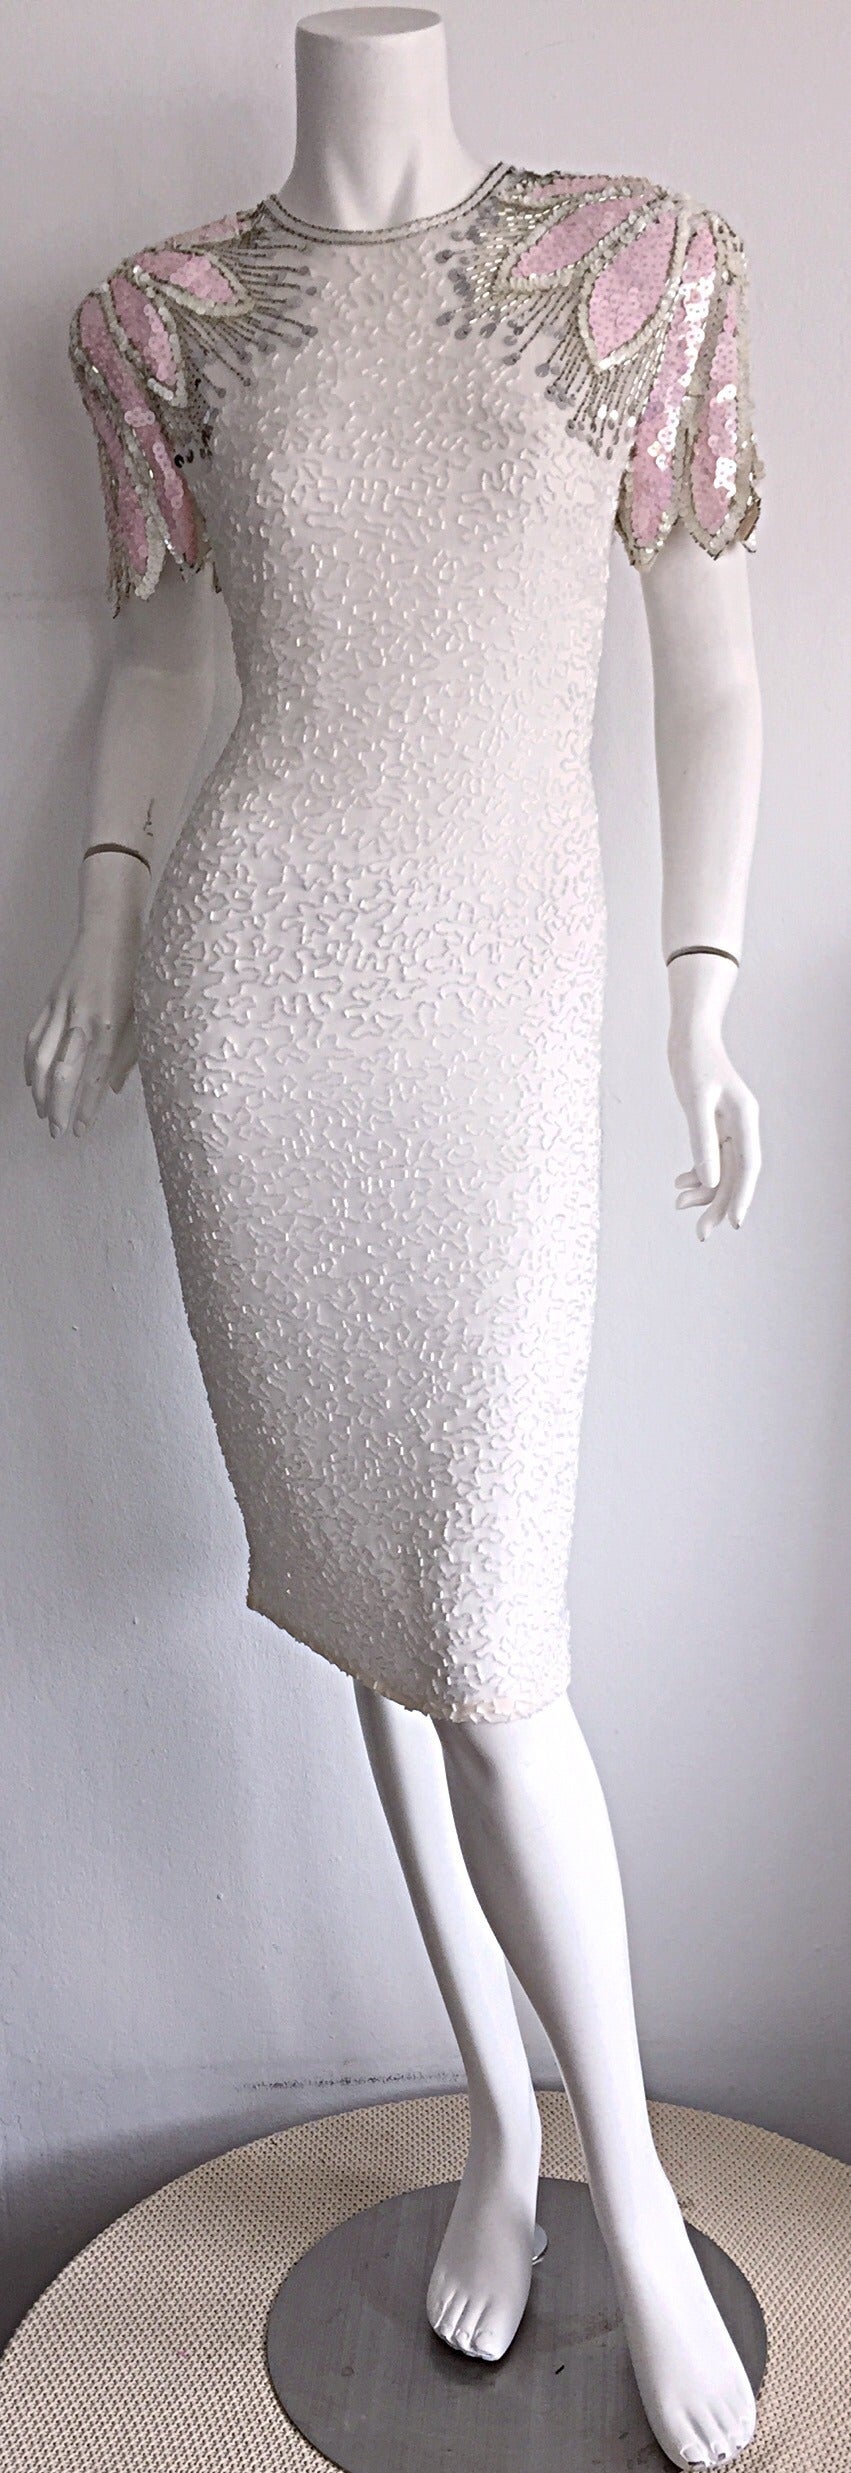 Stunning Vintage White + Pink + Silver Beaded Sequin Illusion Dress w/ Open Back 4